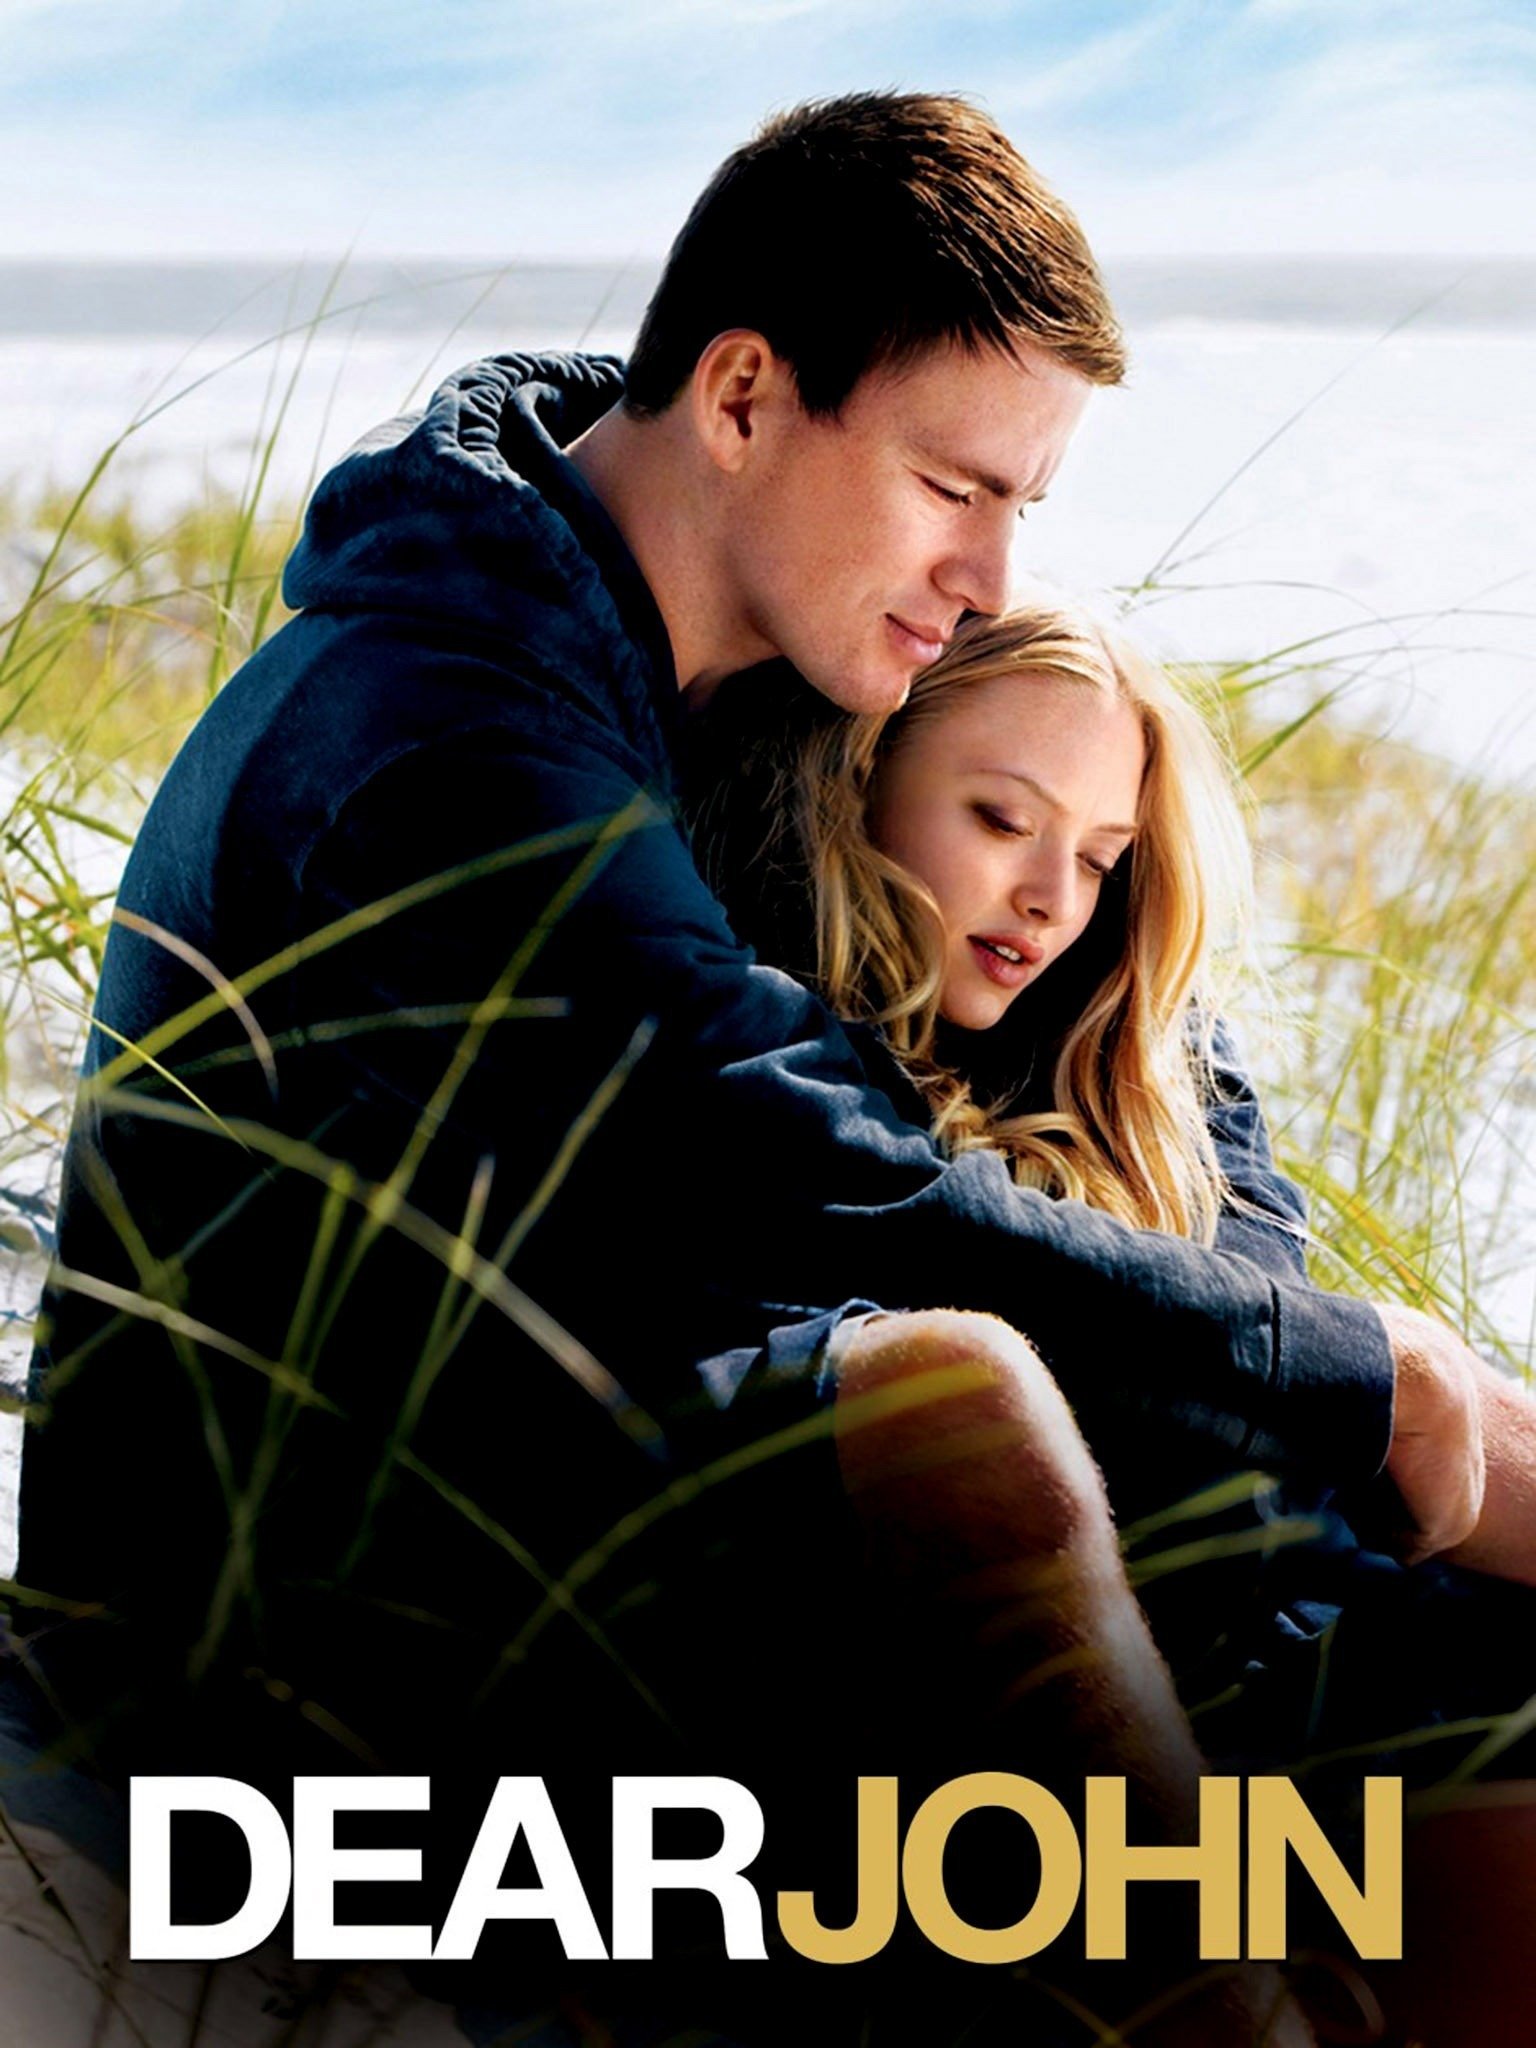 Dear John Movie Characters Wallpapers - Wallpaper Cave